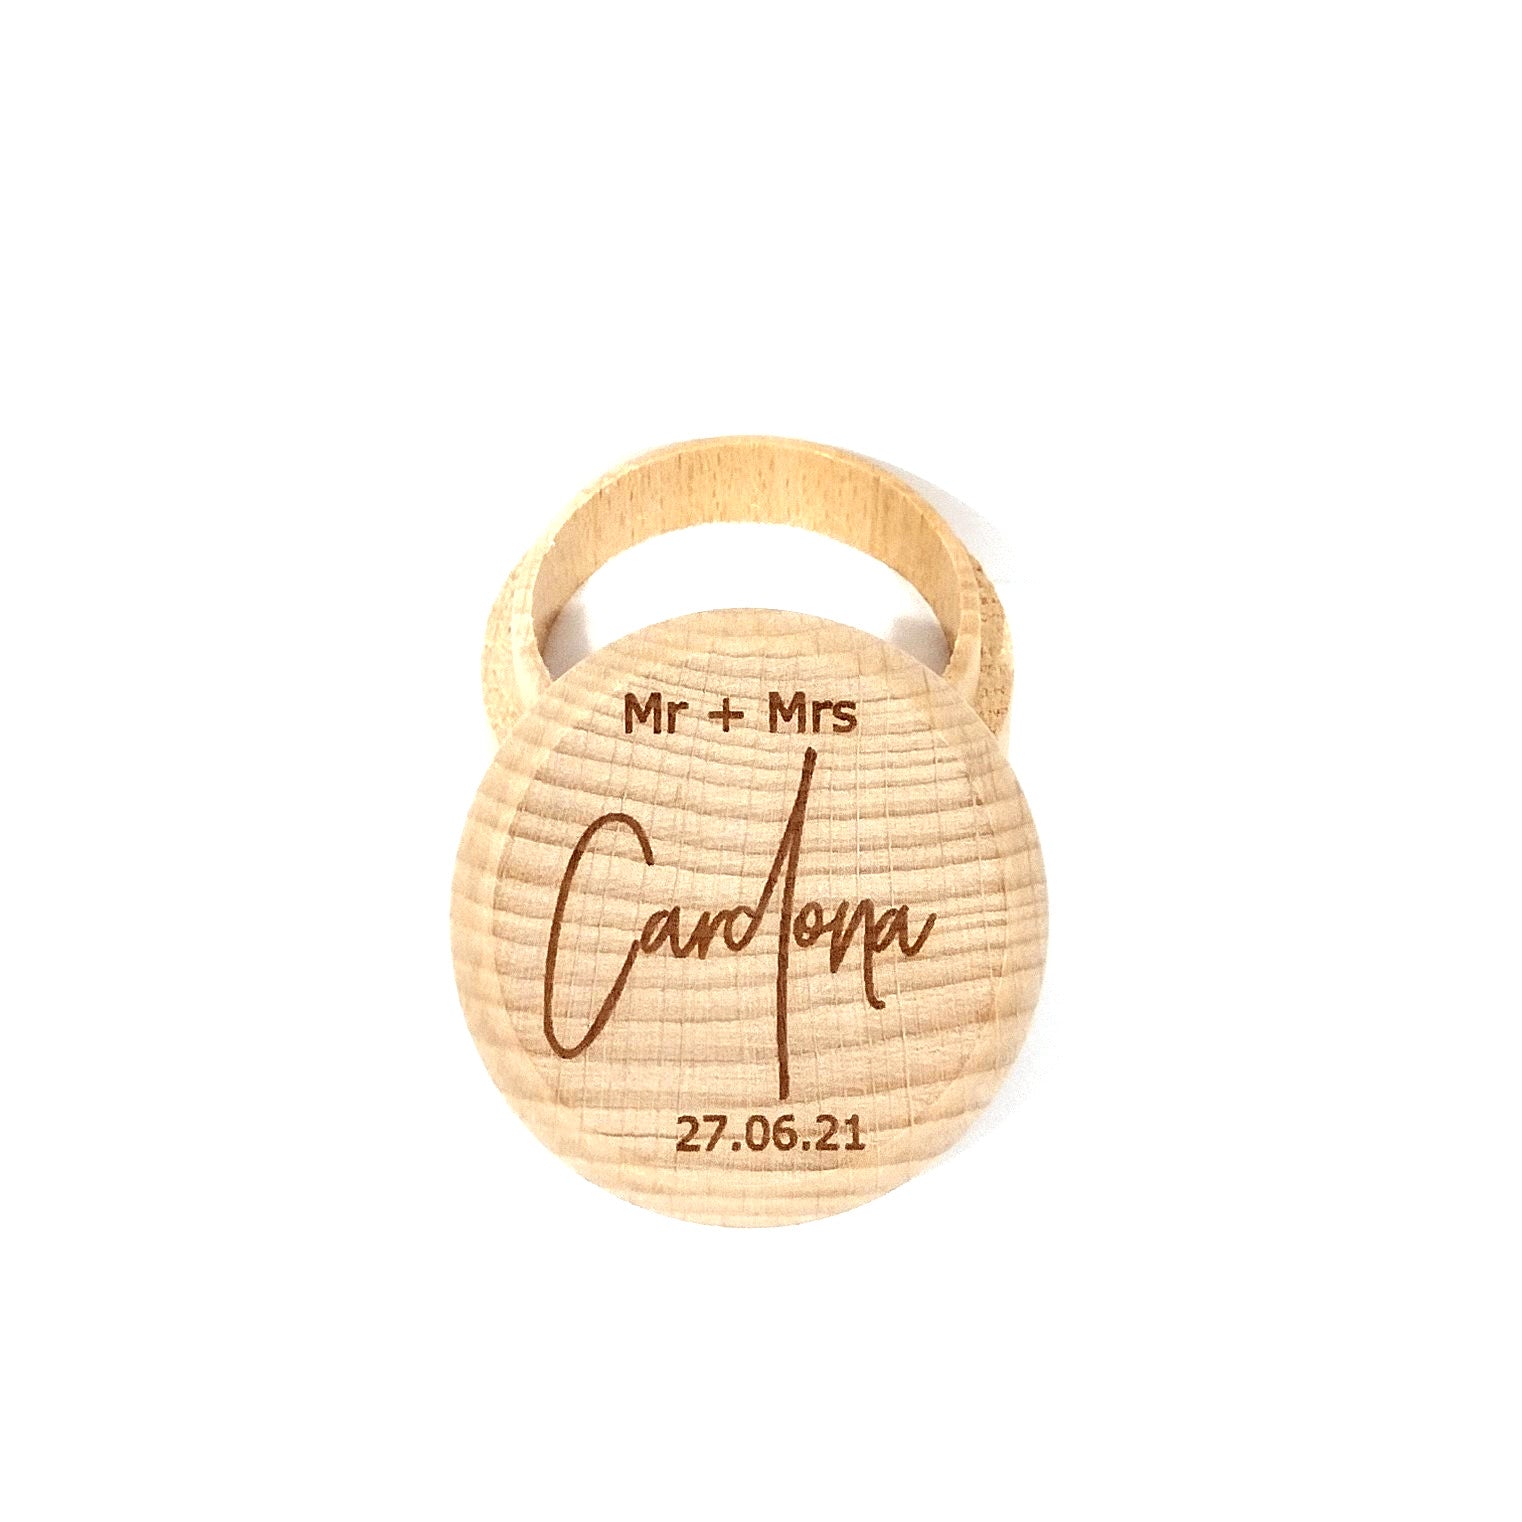 Mr + Mrs | Surname | Date Wooden Ring Box